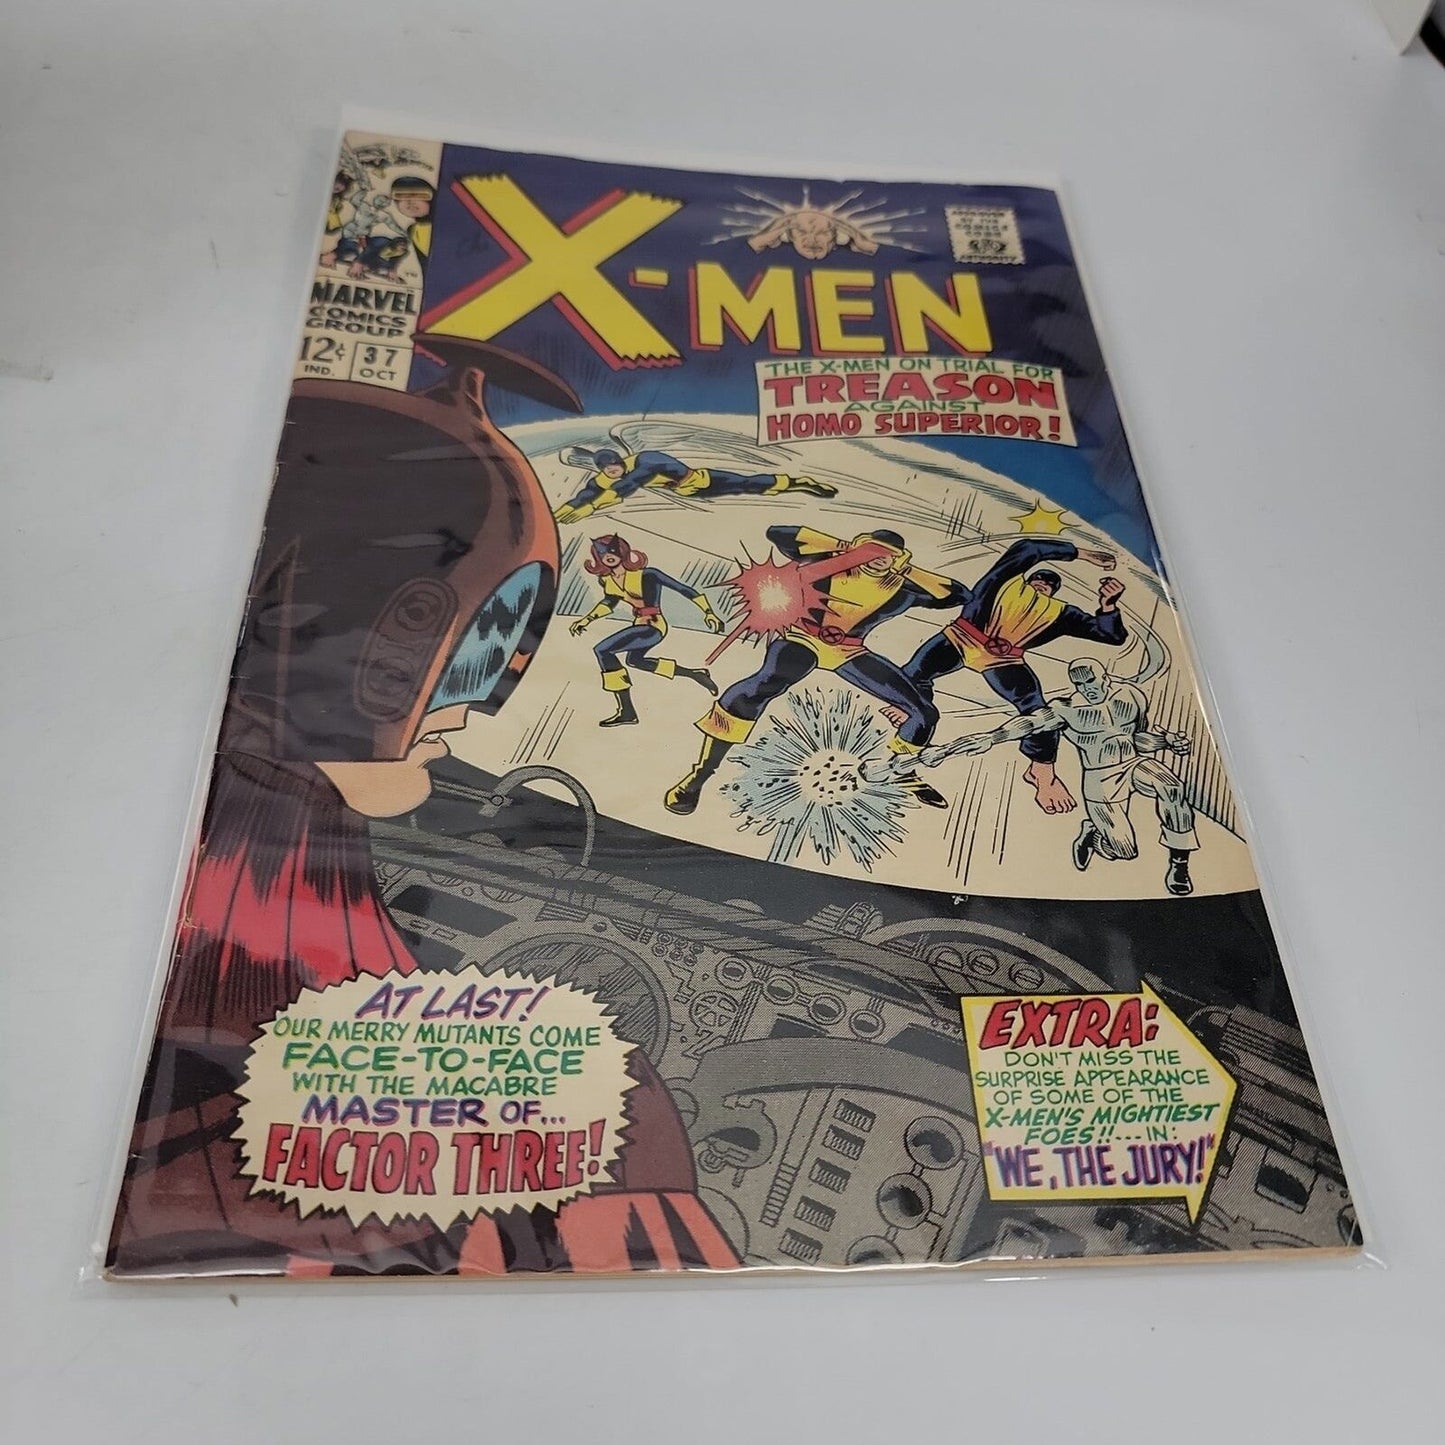 The X-Men "The X-Men on Trial for Treason Against Homo Superior!" Comic